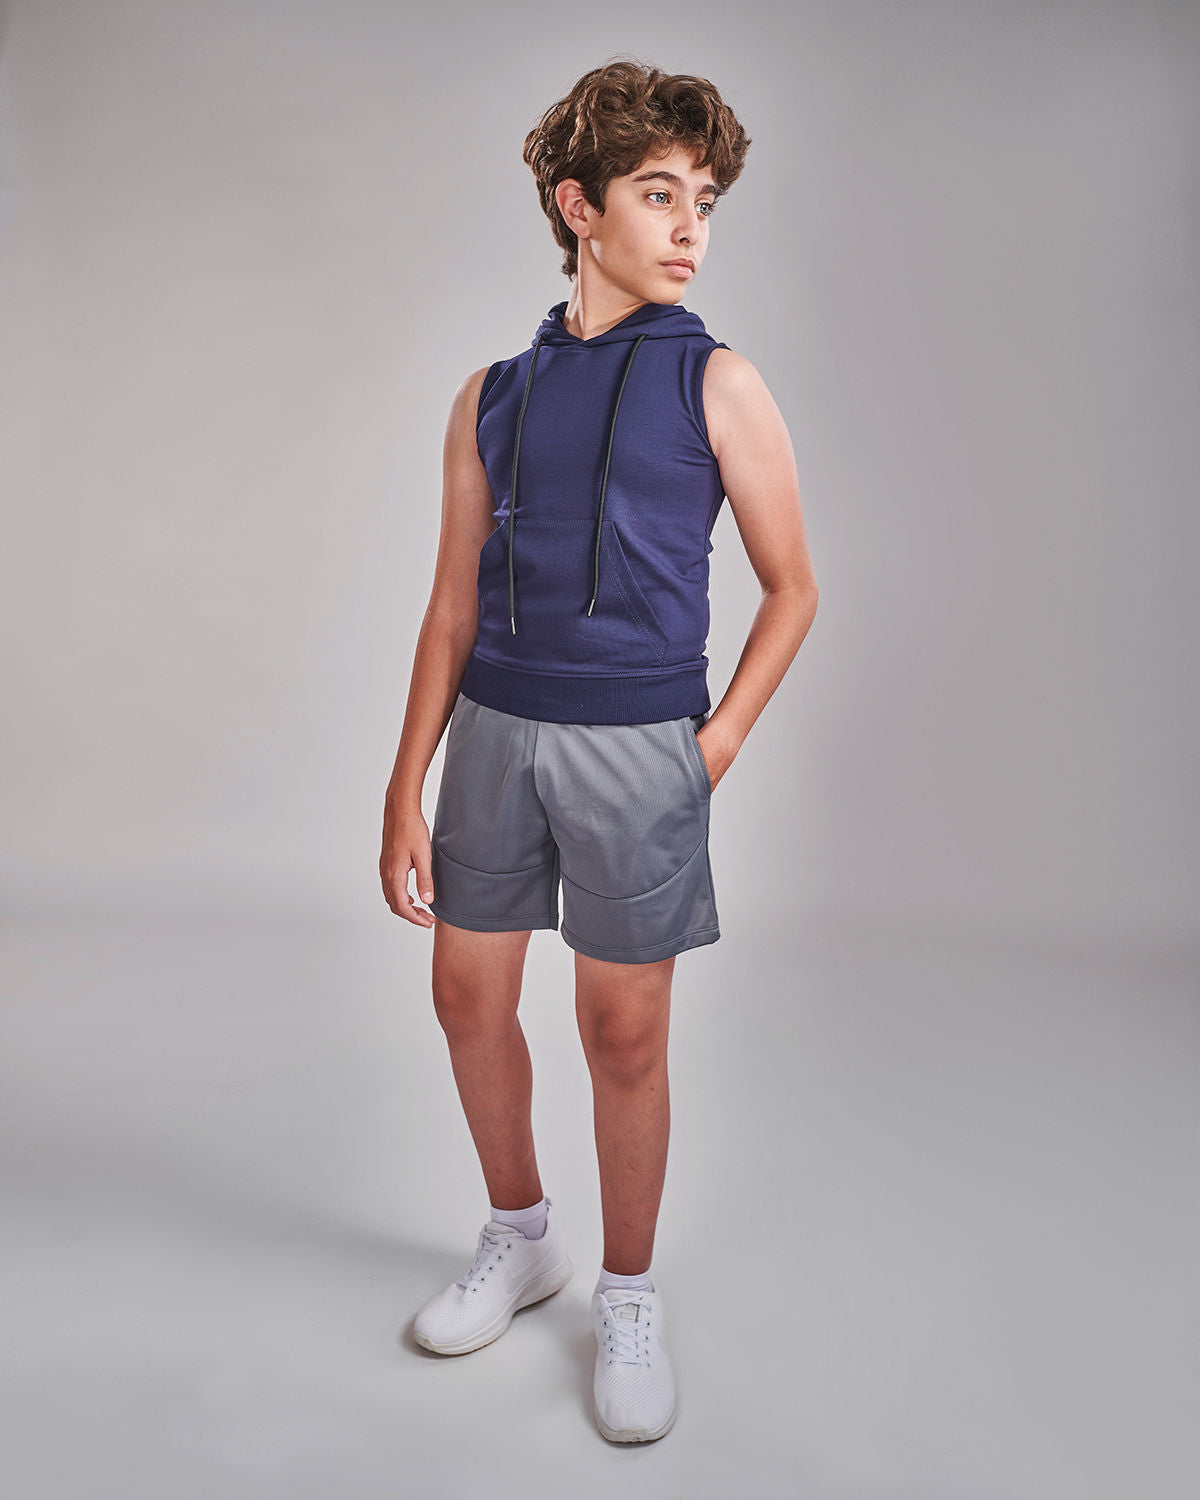 Photo by 𝗔𝗧𝗨𝗠 SPORTSWEAR ® on December 20, 2022. May be an image of 1 boy wears navy hooded top and a gray shorts with in game logo.